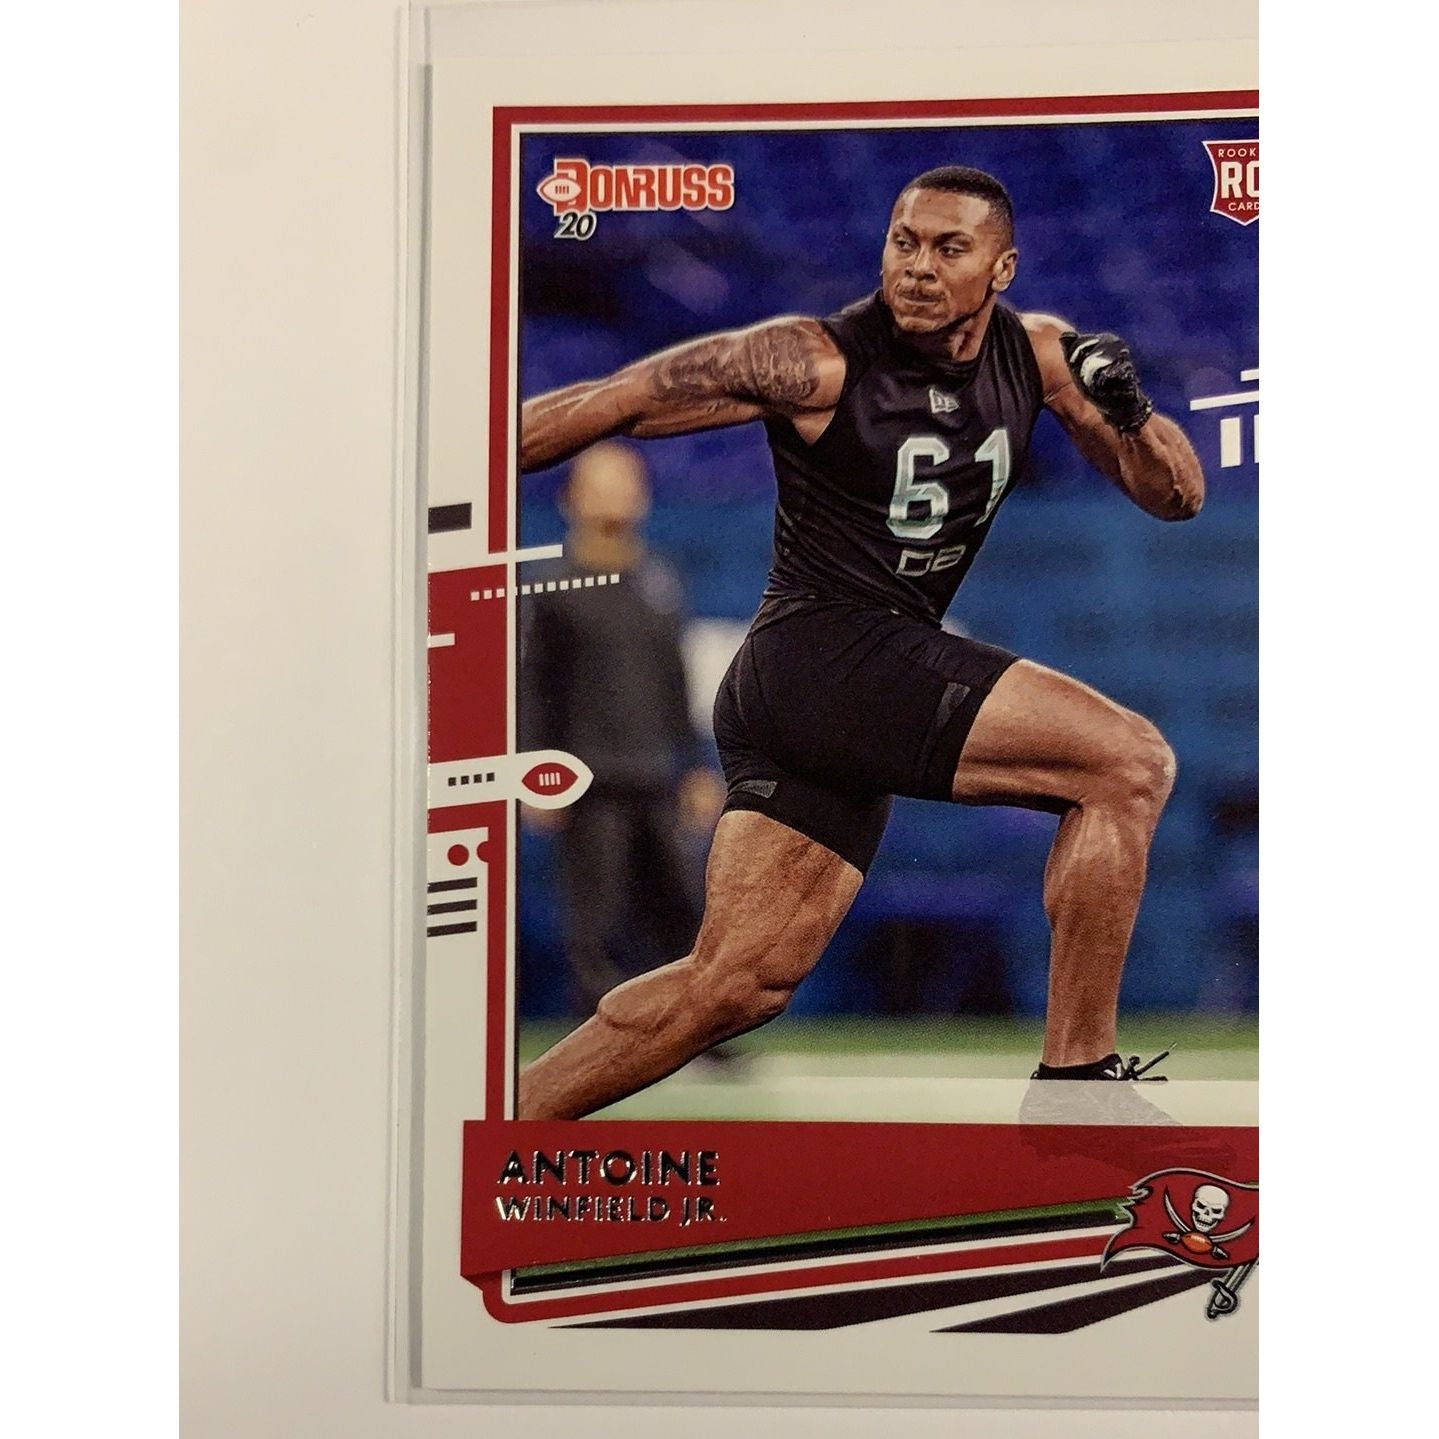  2020 Donruss Antoine Winfield Jr. RC  Local Legends Cards & Collectibles